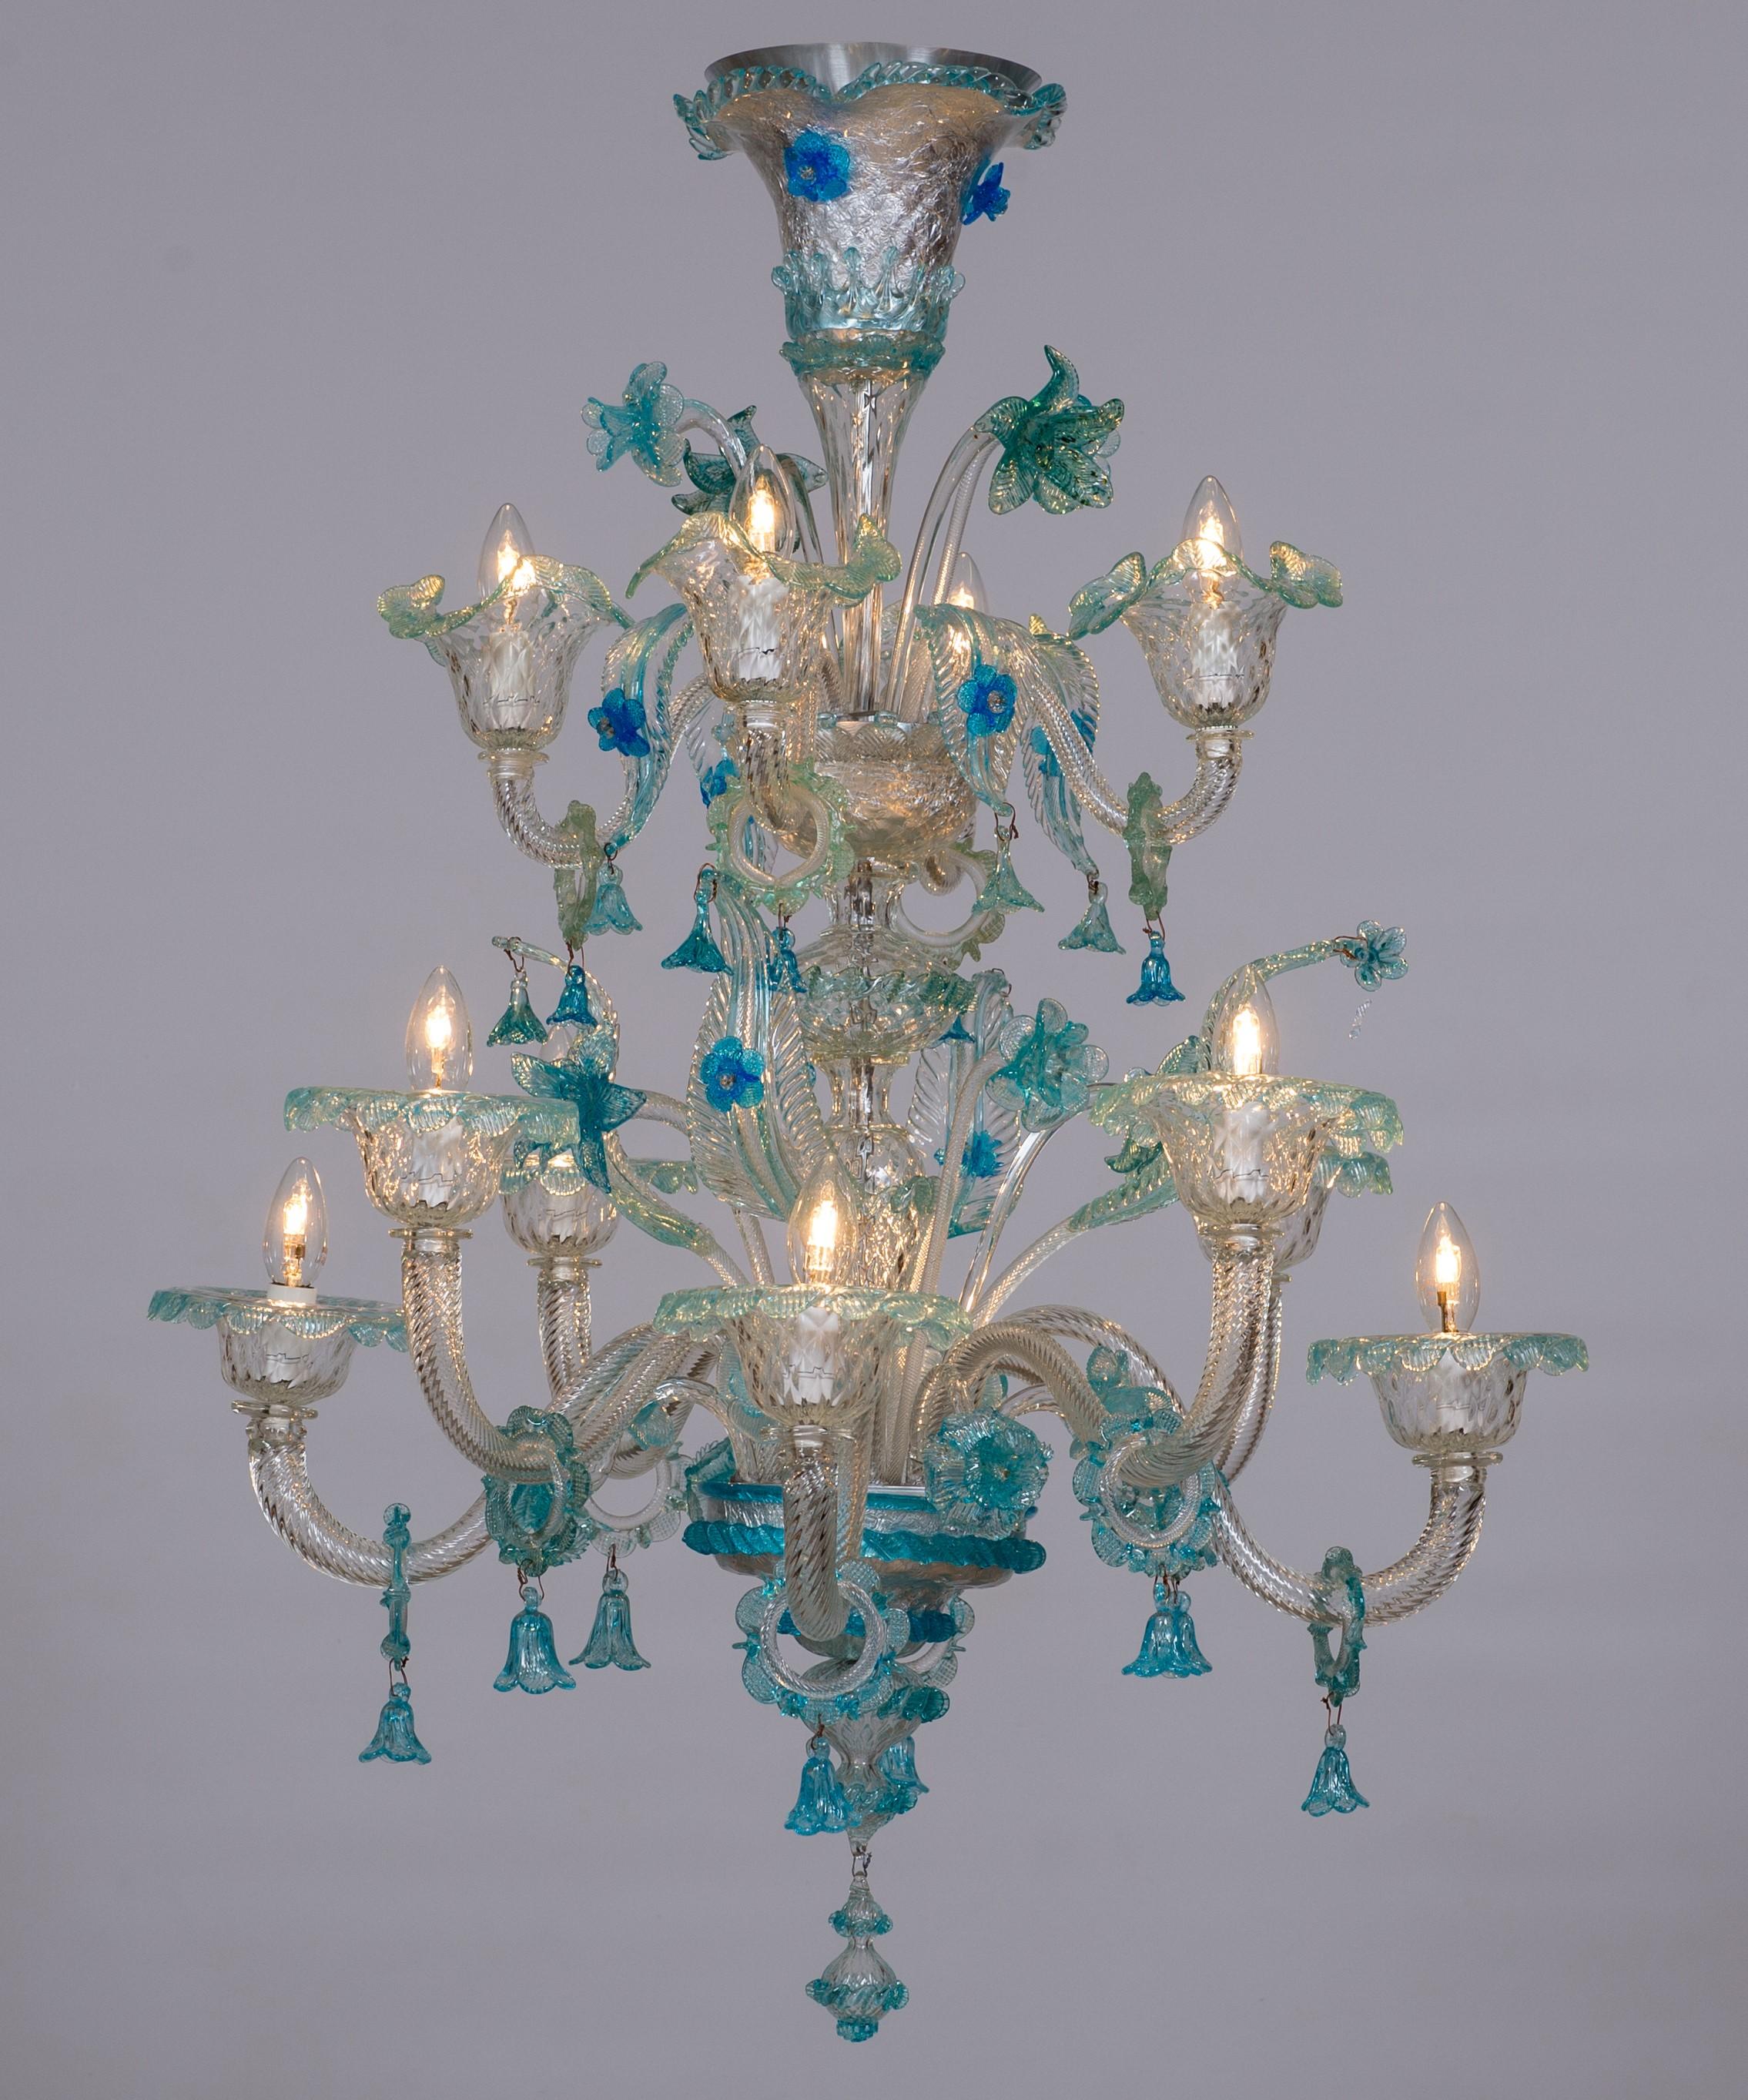 Double Tiered Murano Glass Chandelier in vivid Blue Floral Patterns 1990s Italy For Sale 13